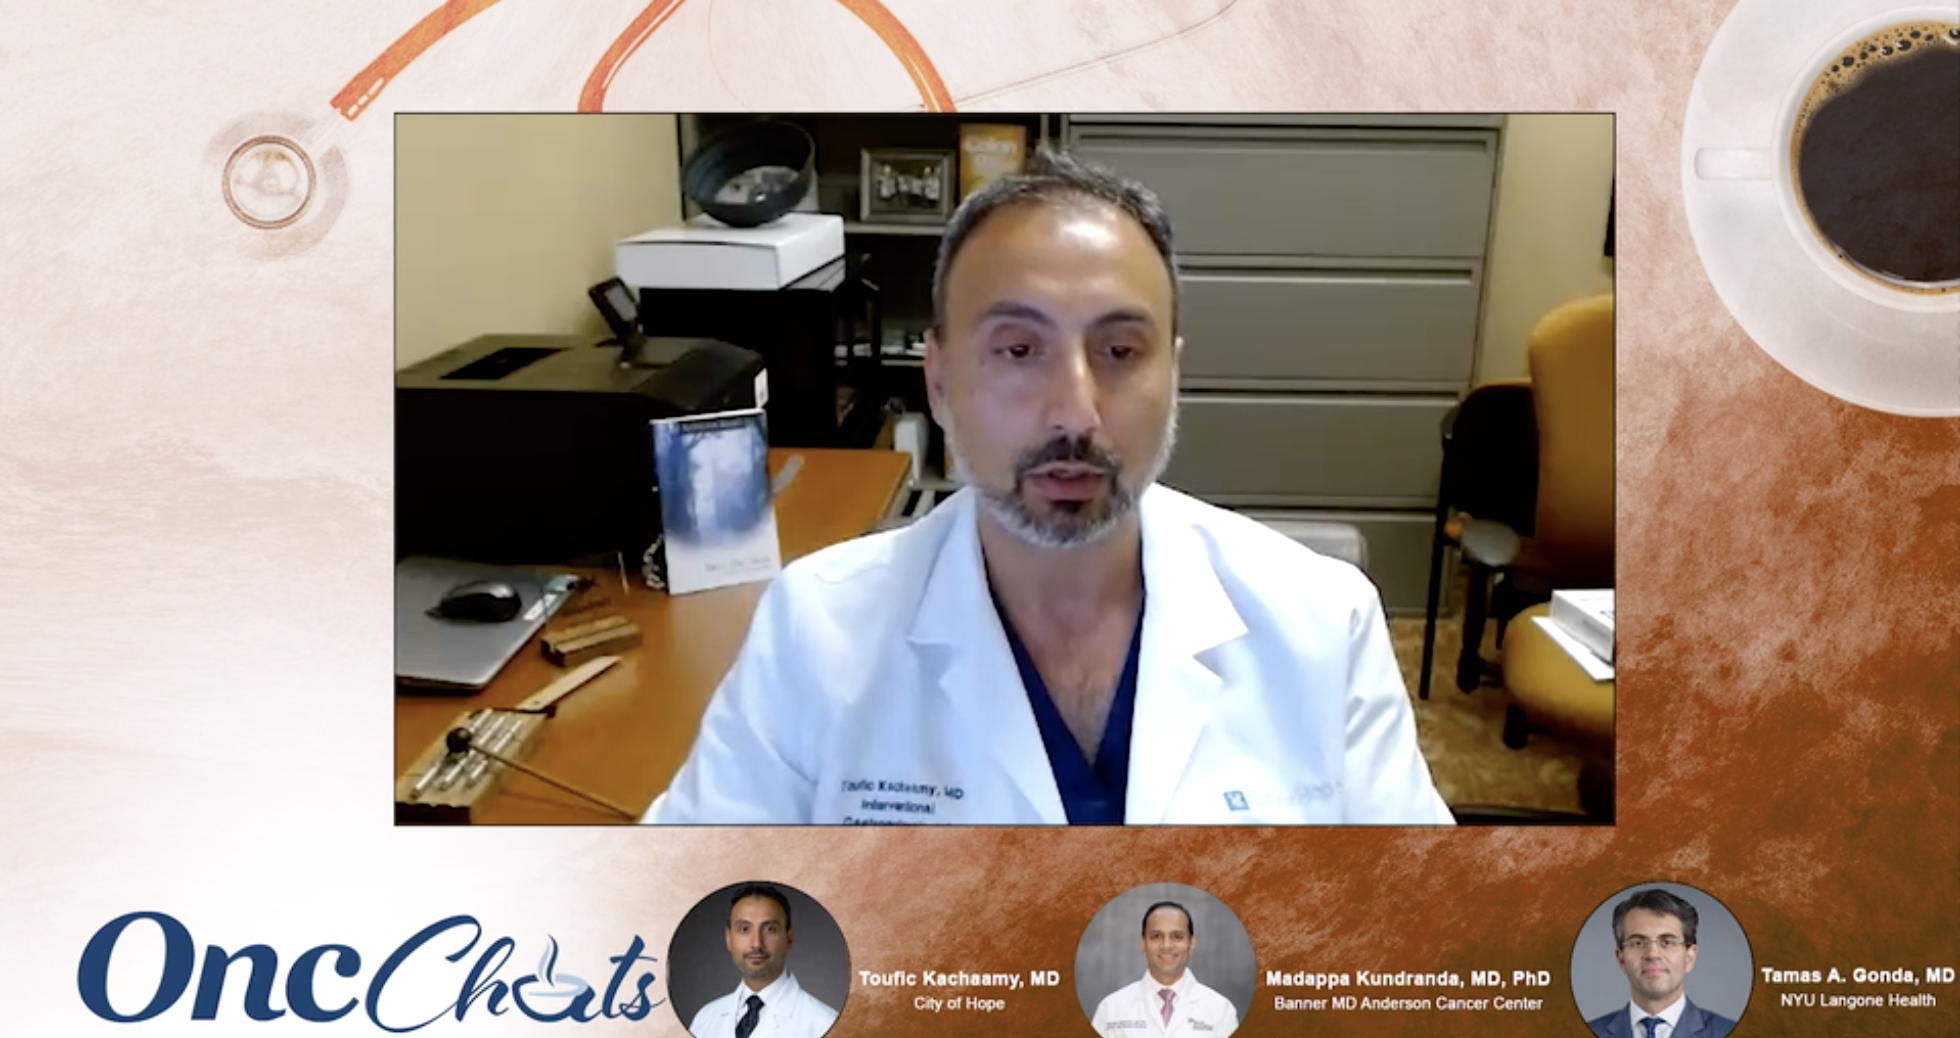 In this fourth episode of OncChats: Leveraging Endoscopic Ultrasound in Pancreatic Cancer, Toufic A. Kachaamy, MD, Madappa Kundranda, MD, PhD, and Tamas A. Gonda, MD, discuss what is known about the utilization of endoscopic radiofrequency ablation in nonmetastatic pancreatic adenocarcinoma and the potential for this approach in the paradigm.